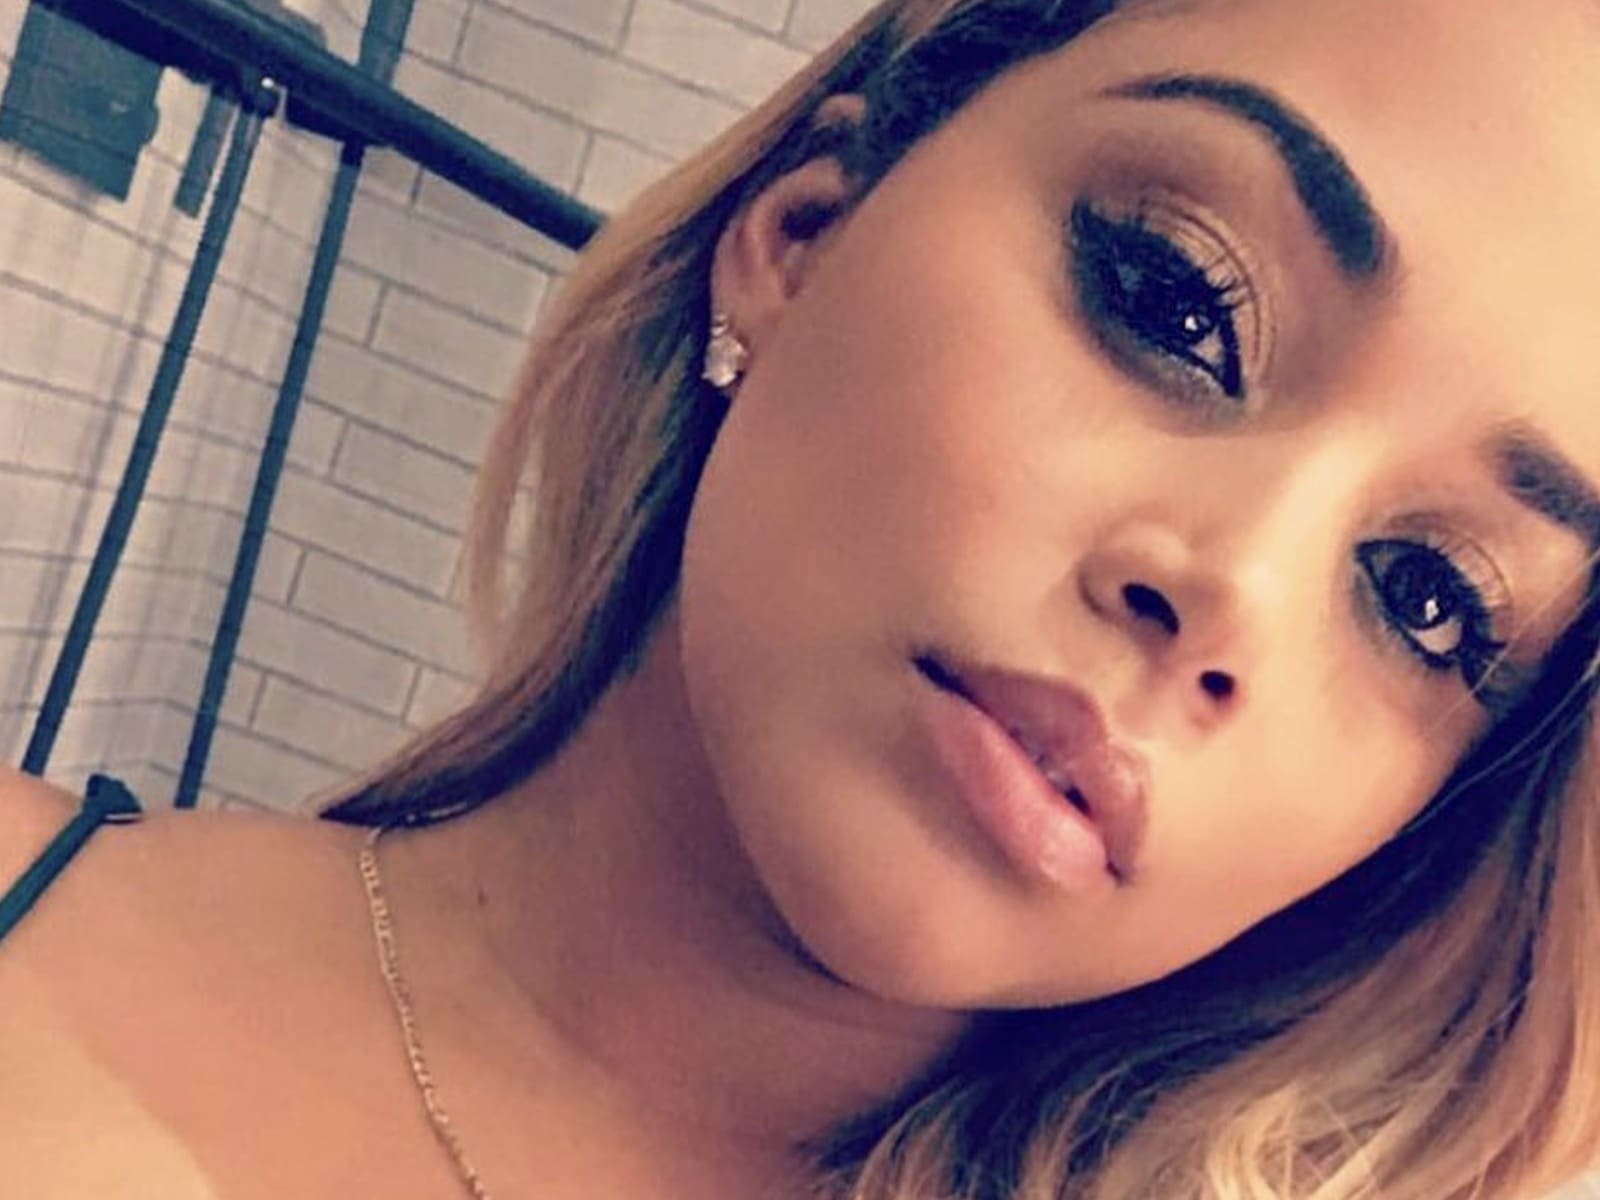 Lauren London Praises Her Sister And Brings A New Announcement About Marathon Clothing: 'We Are Walking The Darkest Of Tunnels Together'